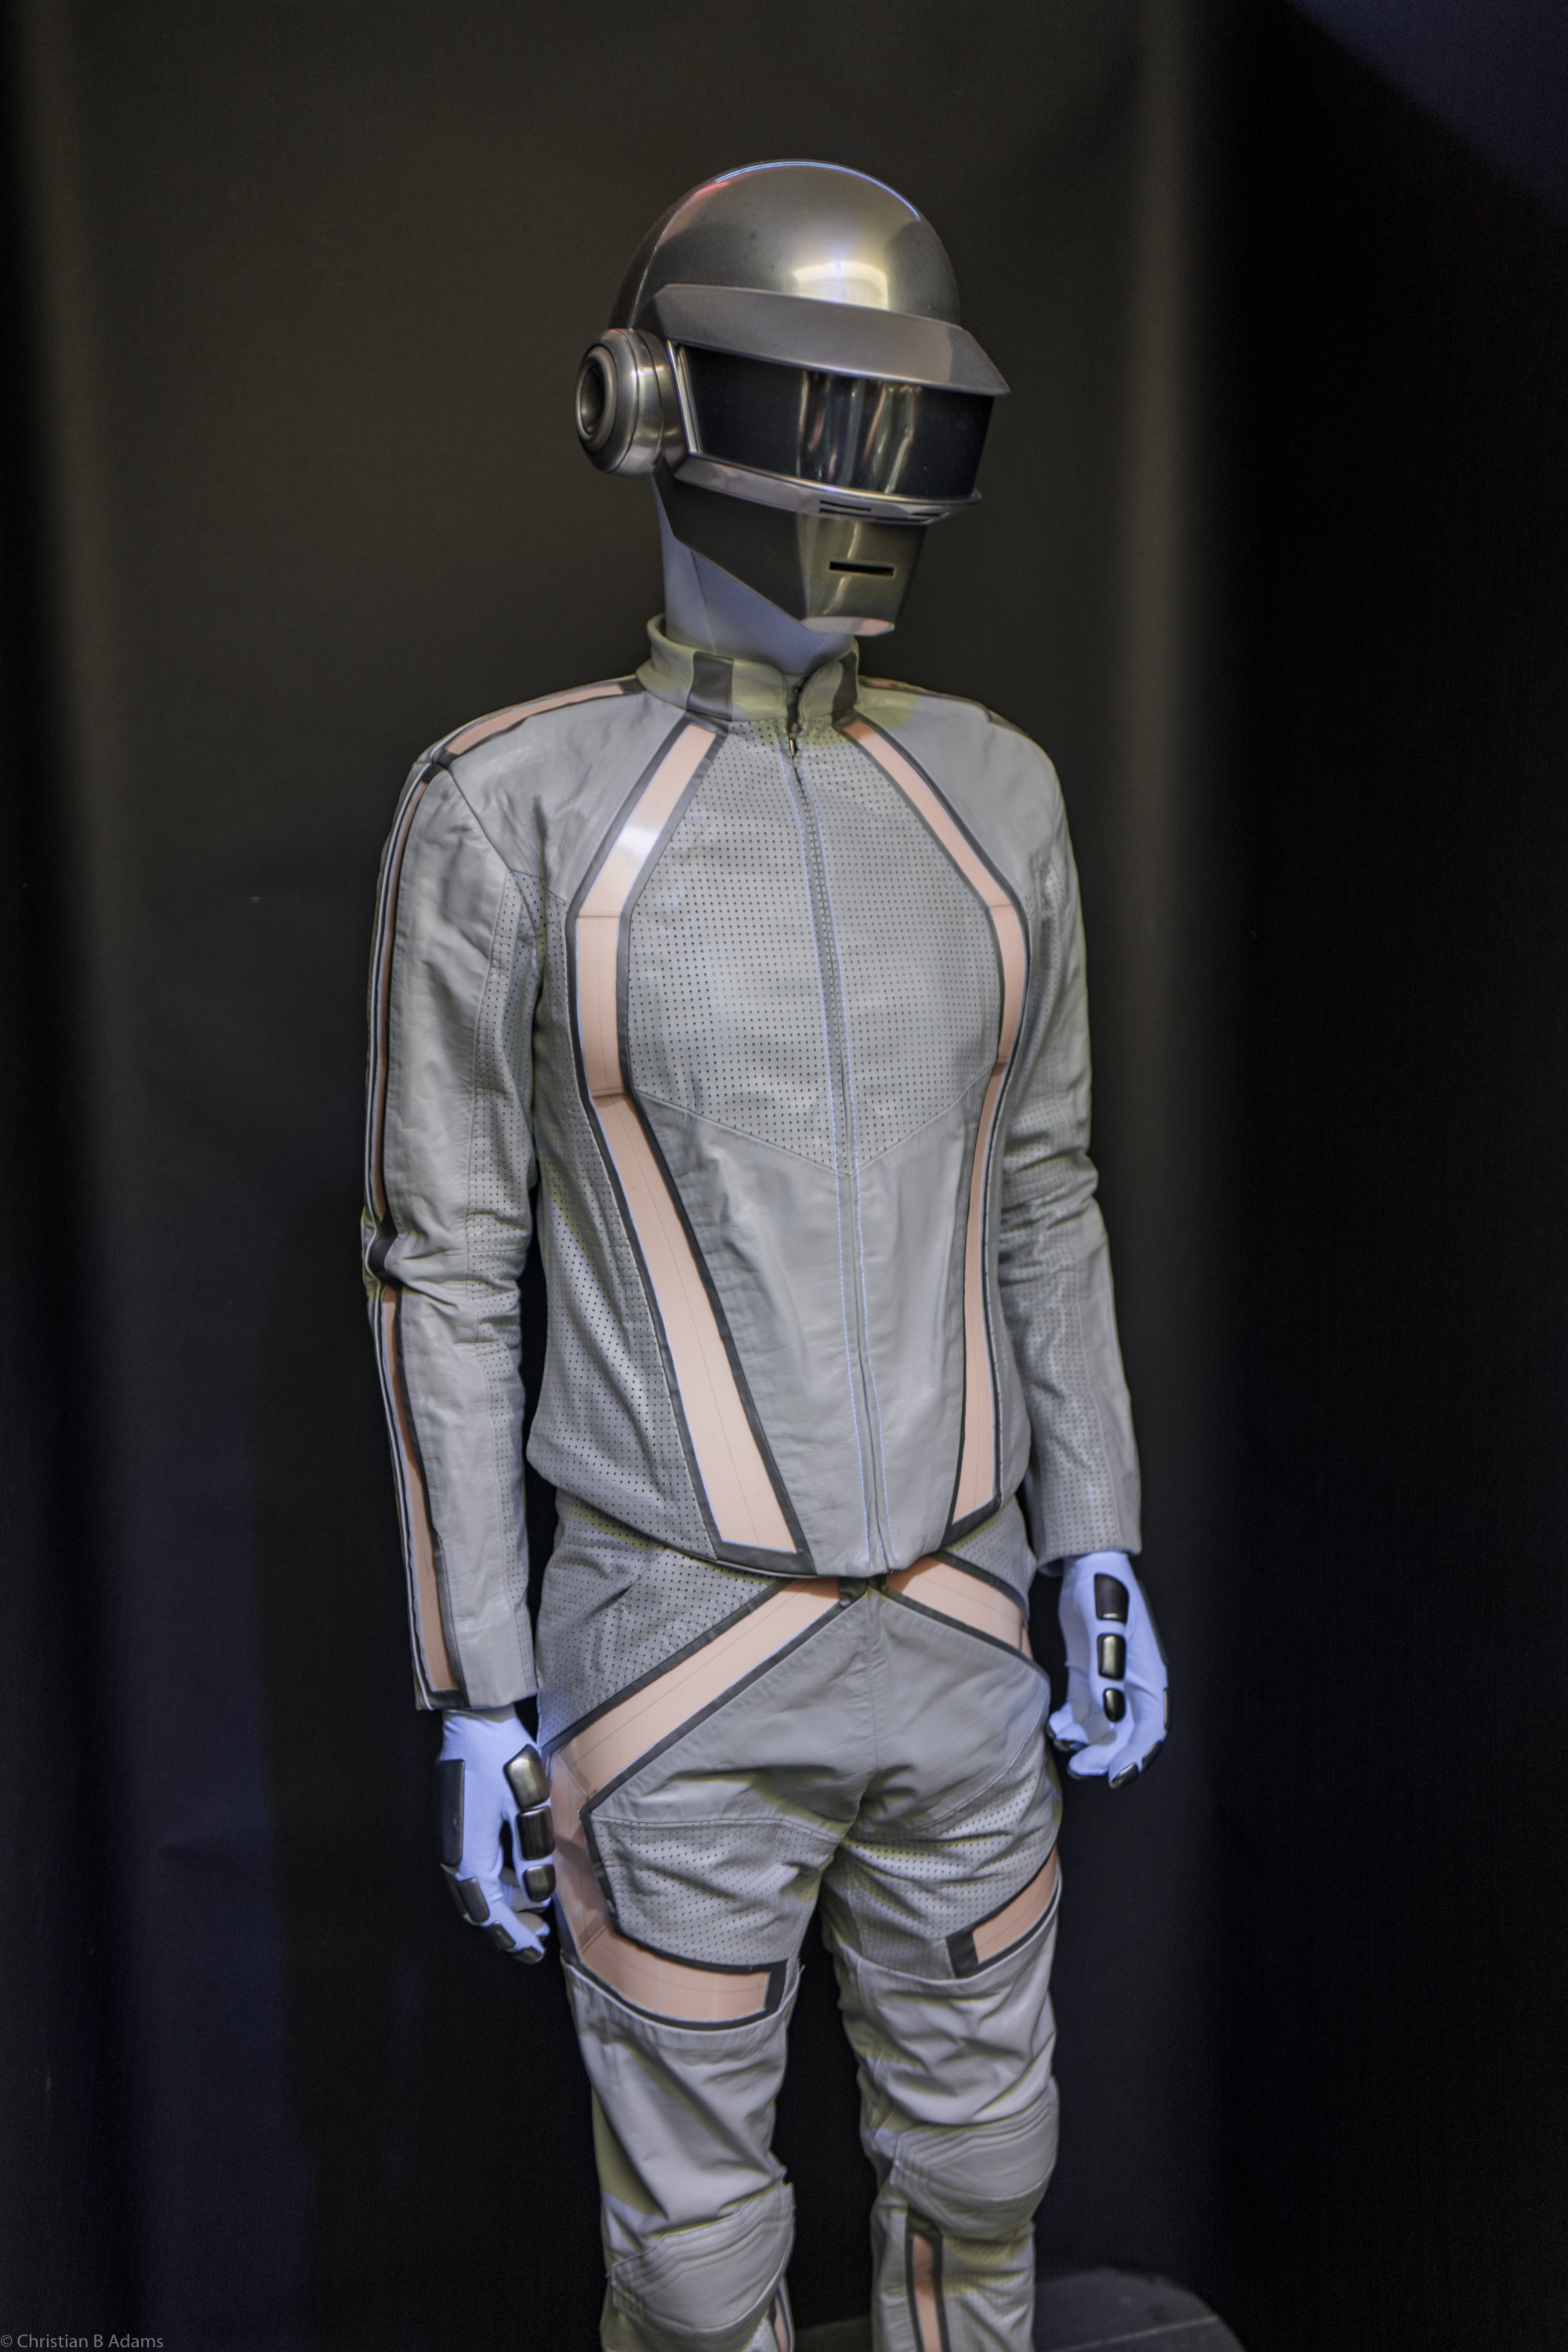 Thomas Bangalter's Tron: Legacy cameo robot costume at the Daft Punk Pop Up at Maxfield Gallery Los Angeles in February of 2017.